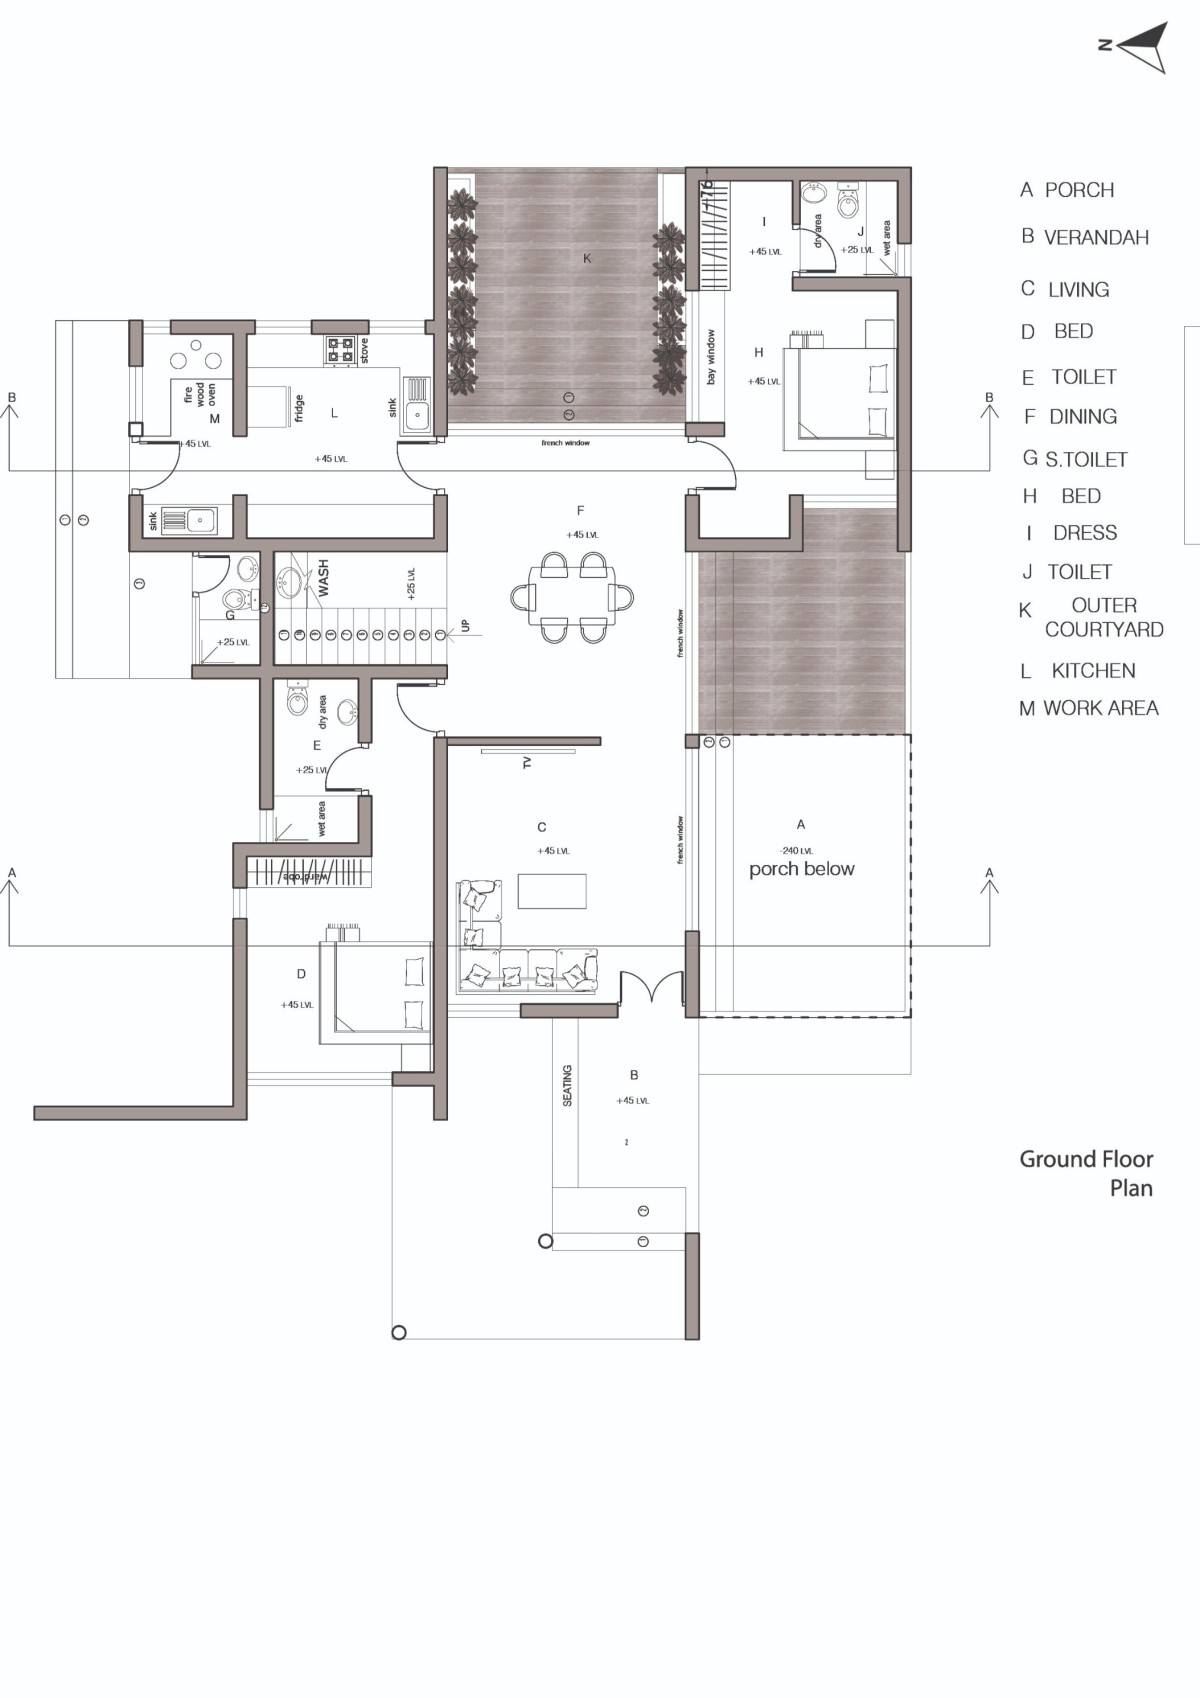 Ground Floor Plan of The Levelscape by Nestcraft Architecture